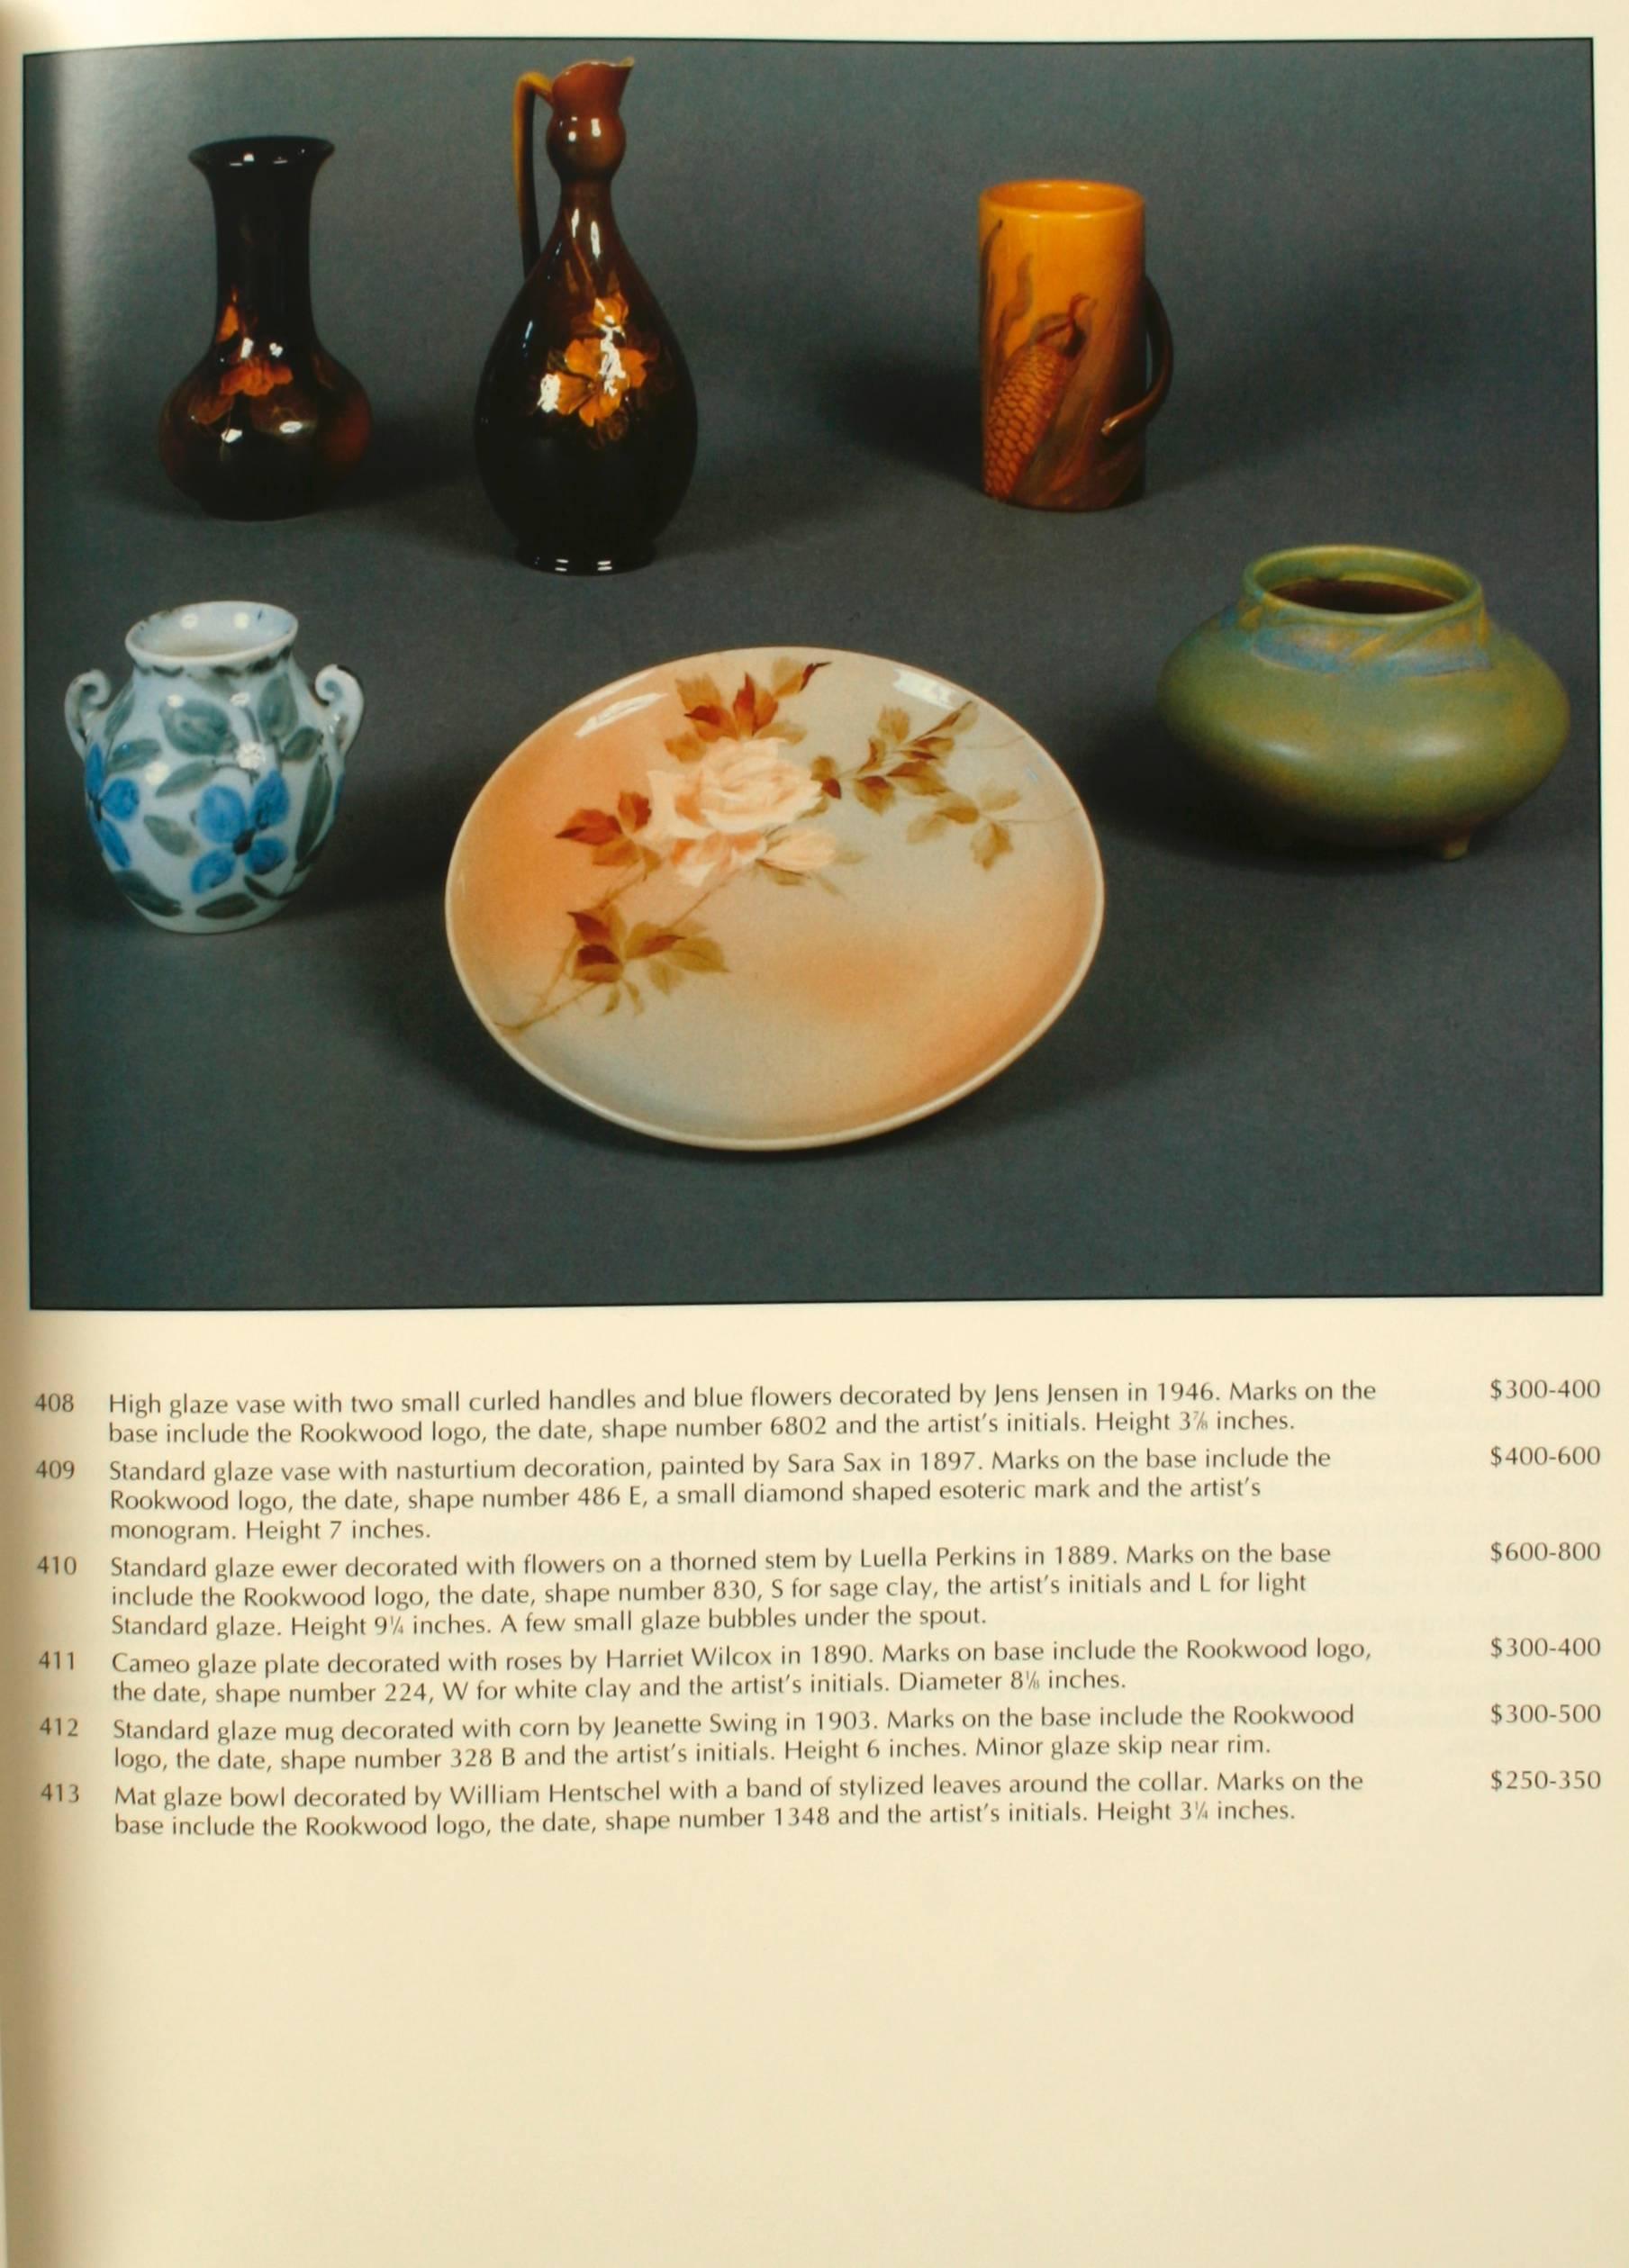 Paper Glover Collection Rookwood Pottery by Cincinnati Art Galleries, 1st Ed For Sale